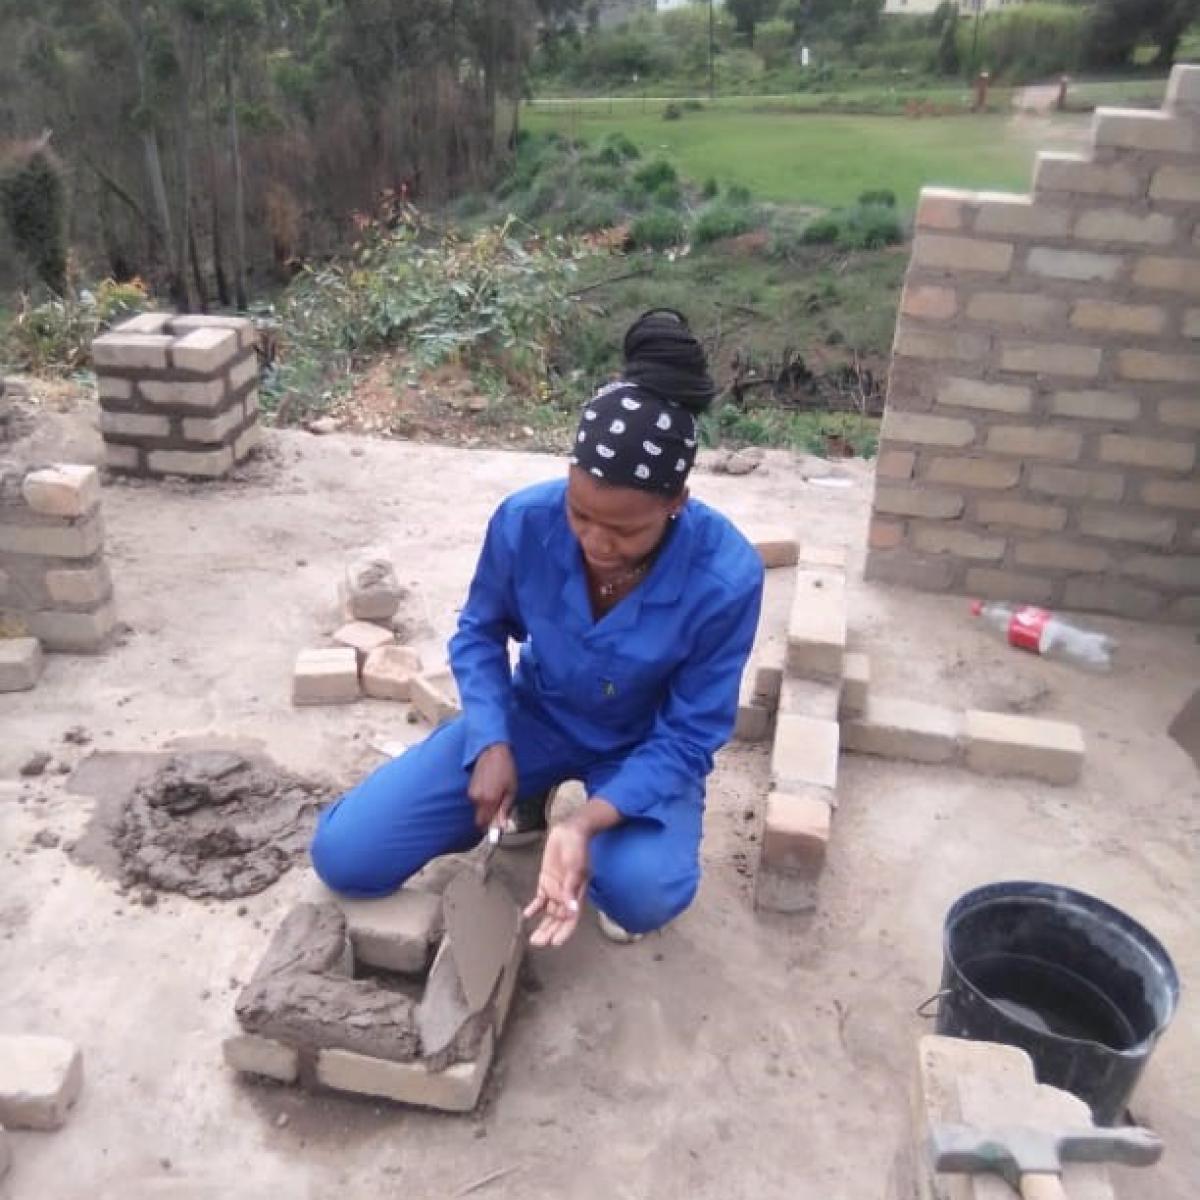 Pheladi working on a construction site